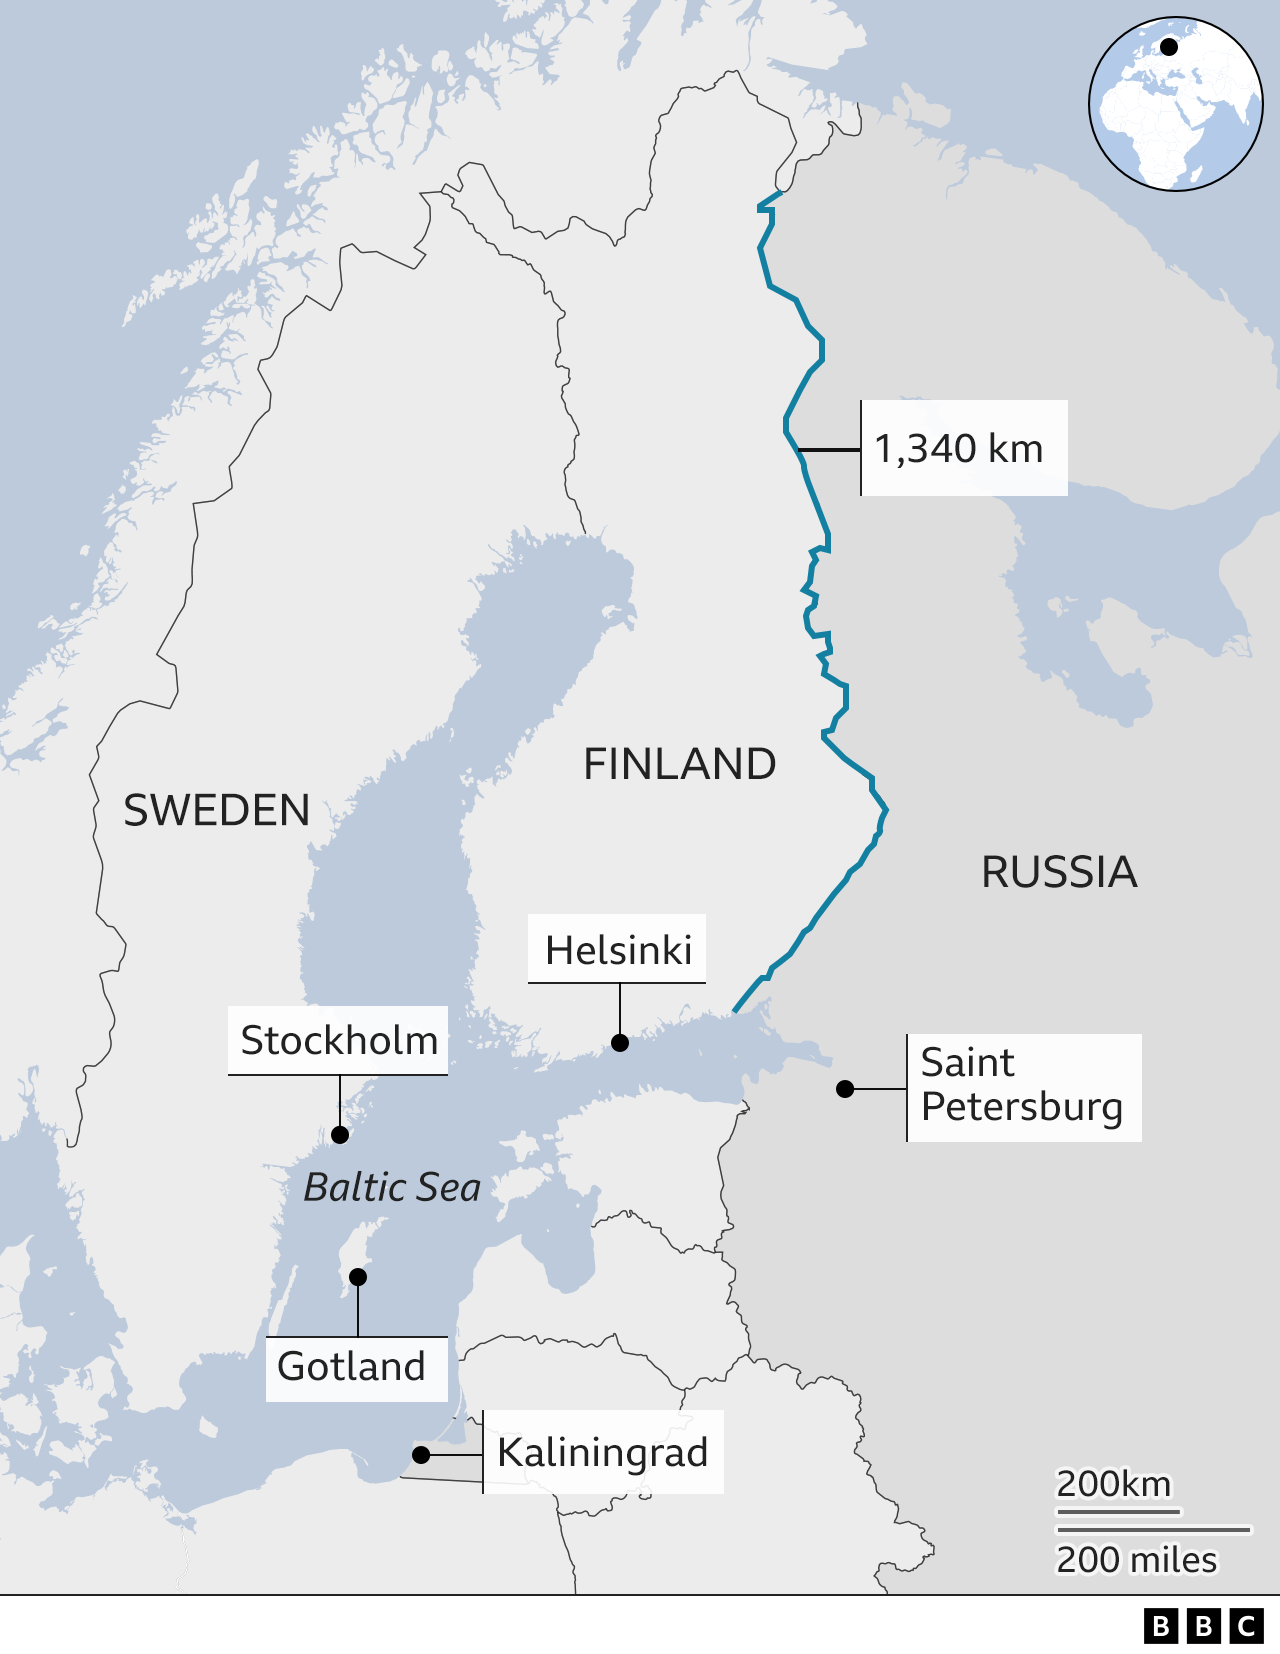 Map of Sweden and Finland with 1,340km (830 mile) border highlighter